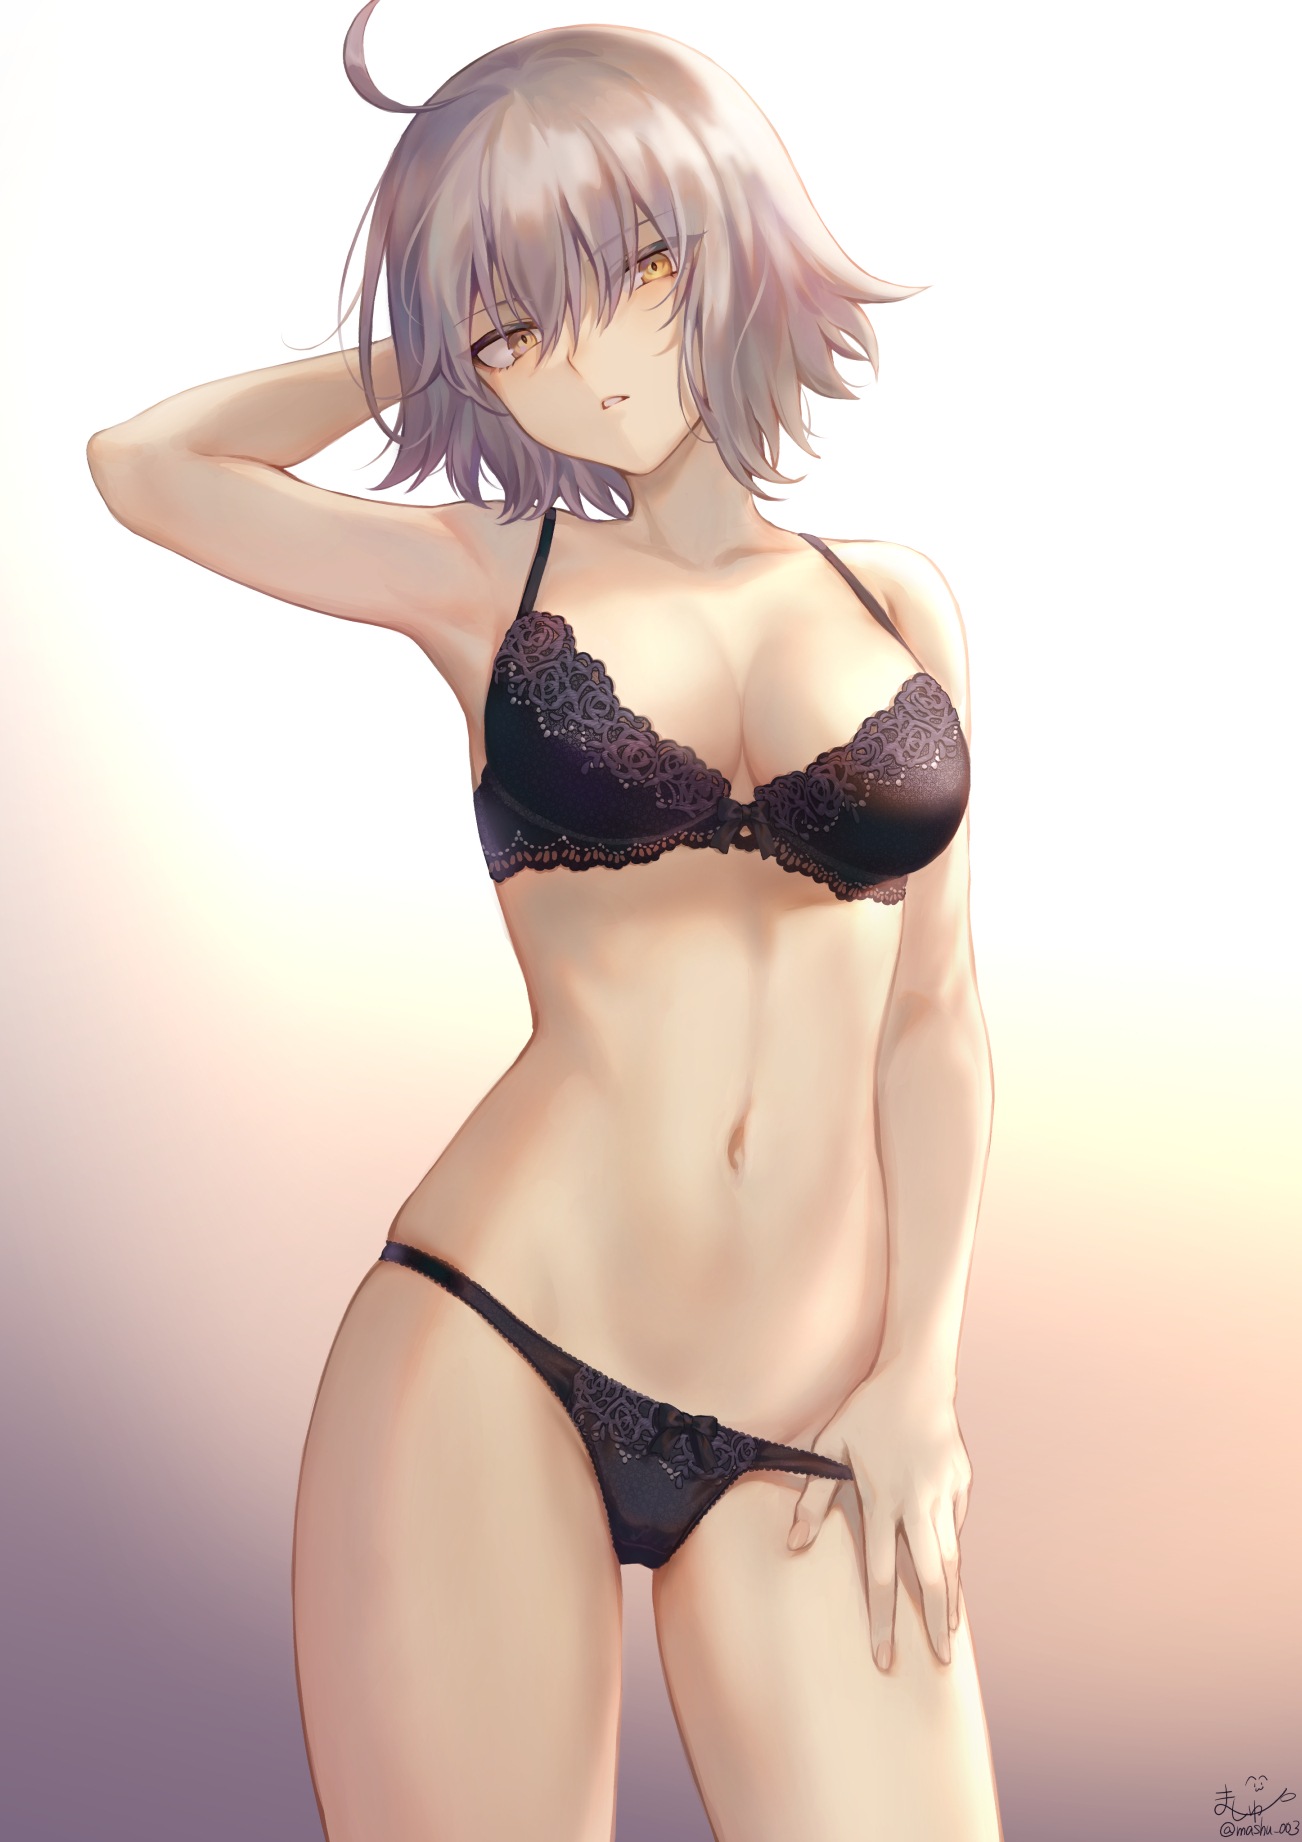 Anime Porn Lingerie - Sexy girls of anime posing in hot lingerie and stockings - 26 Pics | Hentai  City